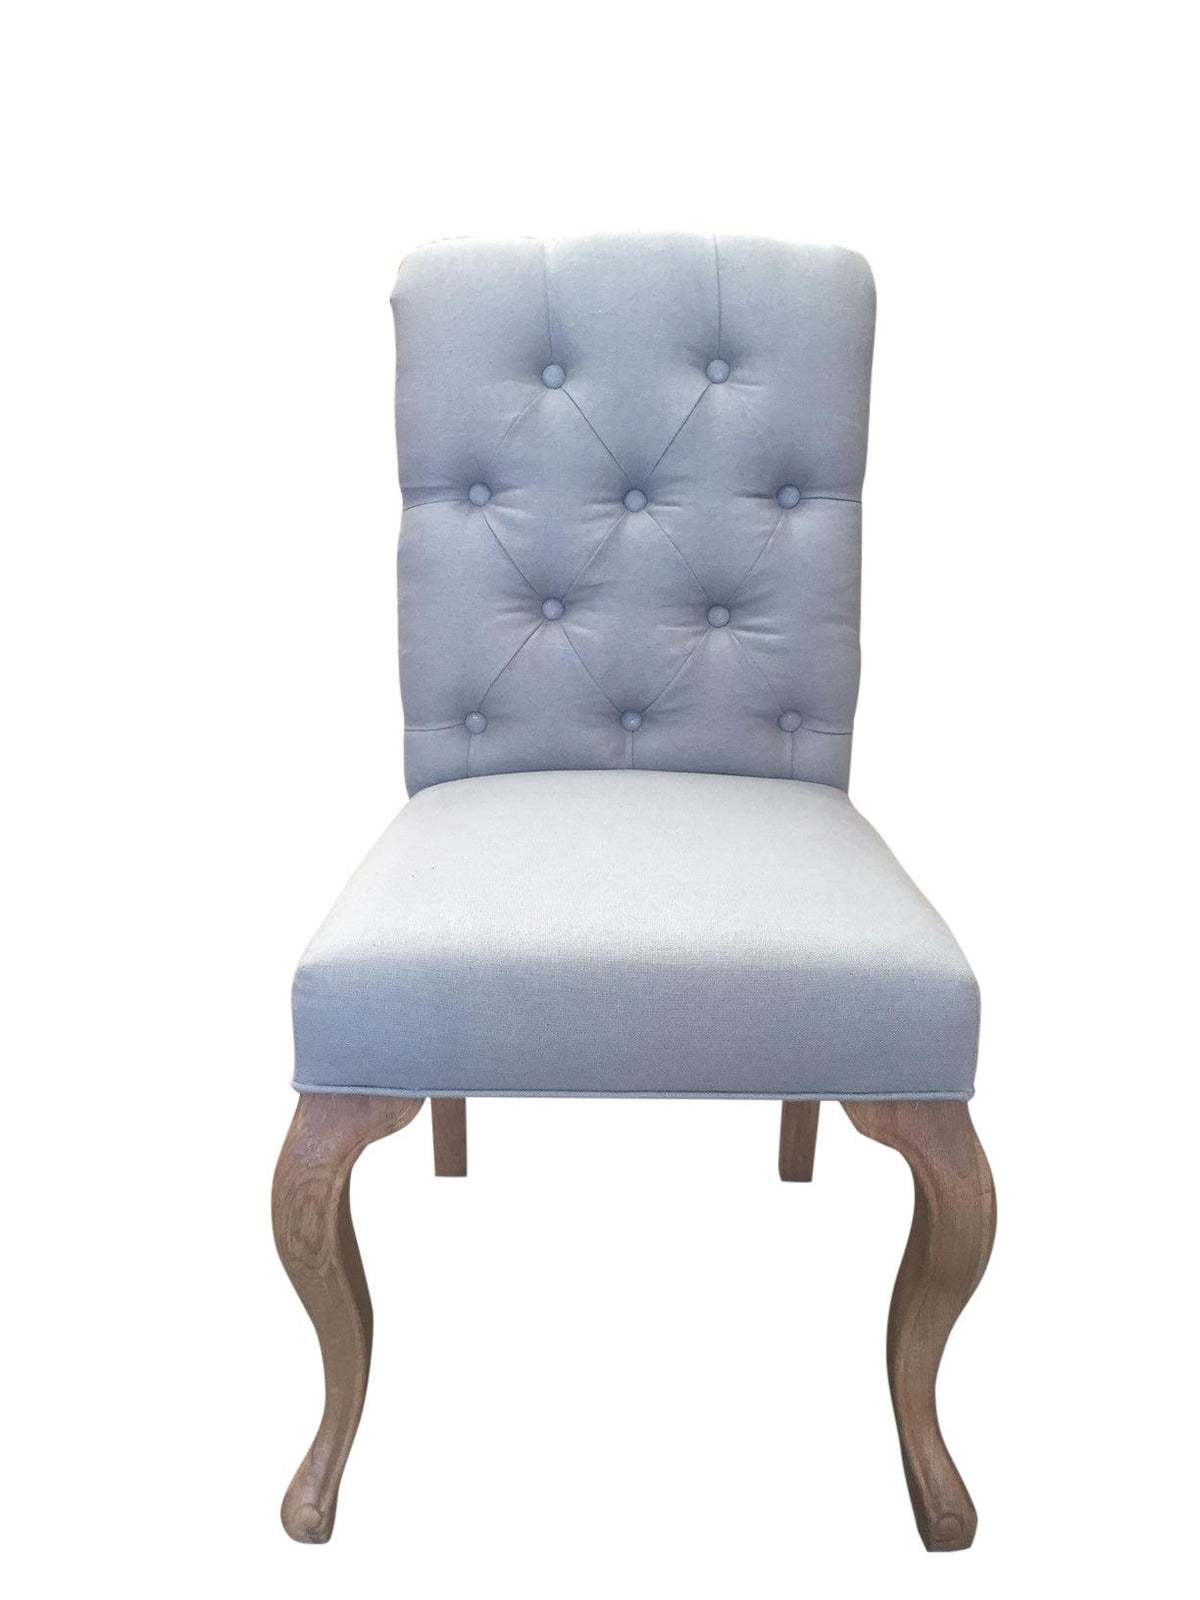 Duck Egg Blue Linen French Style Buttoned Dining Chair